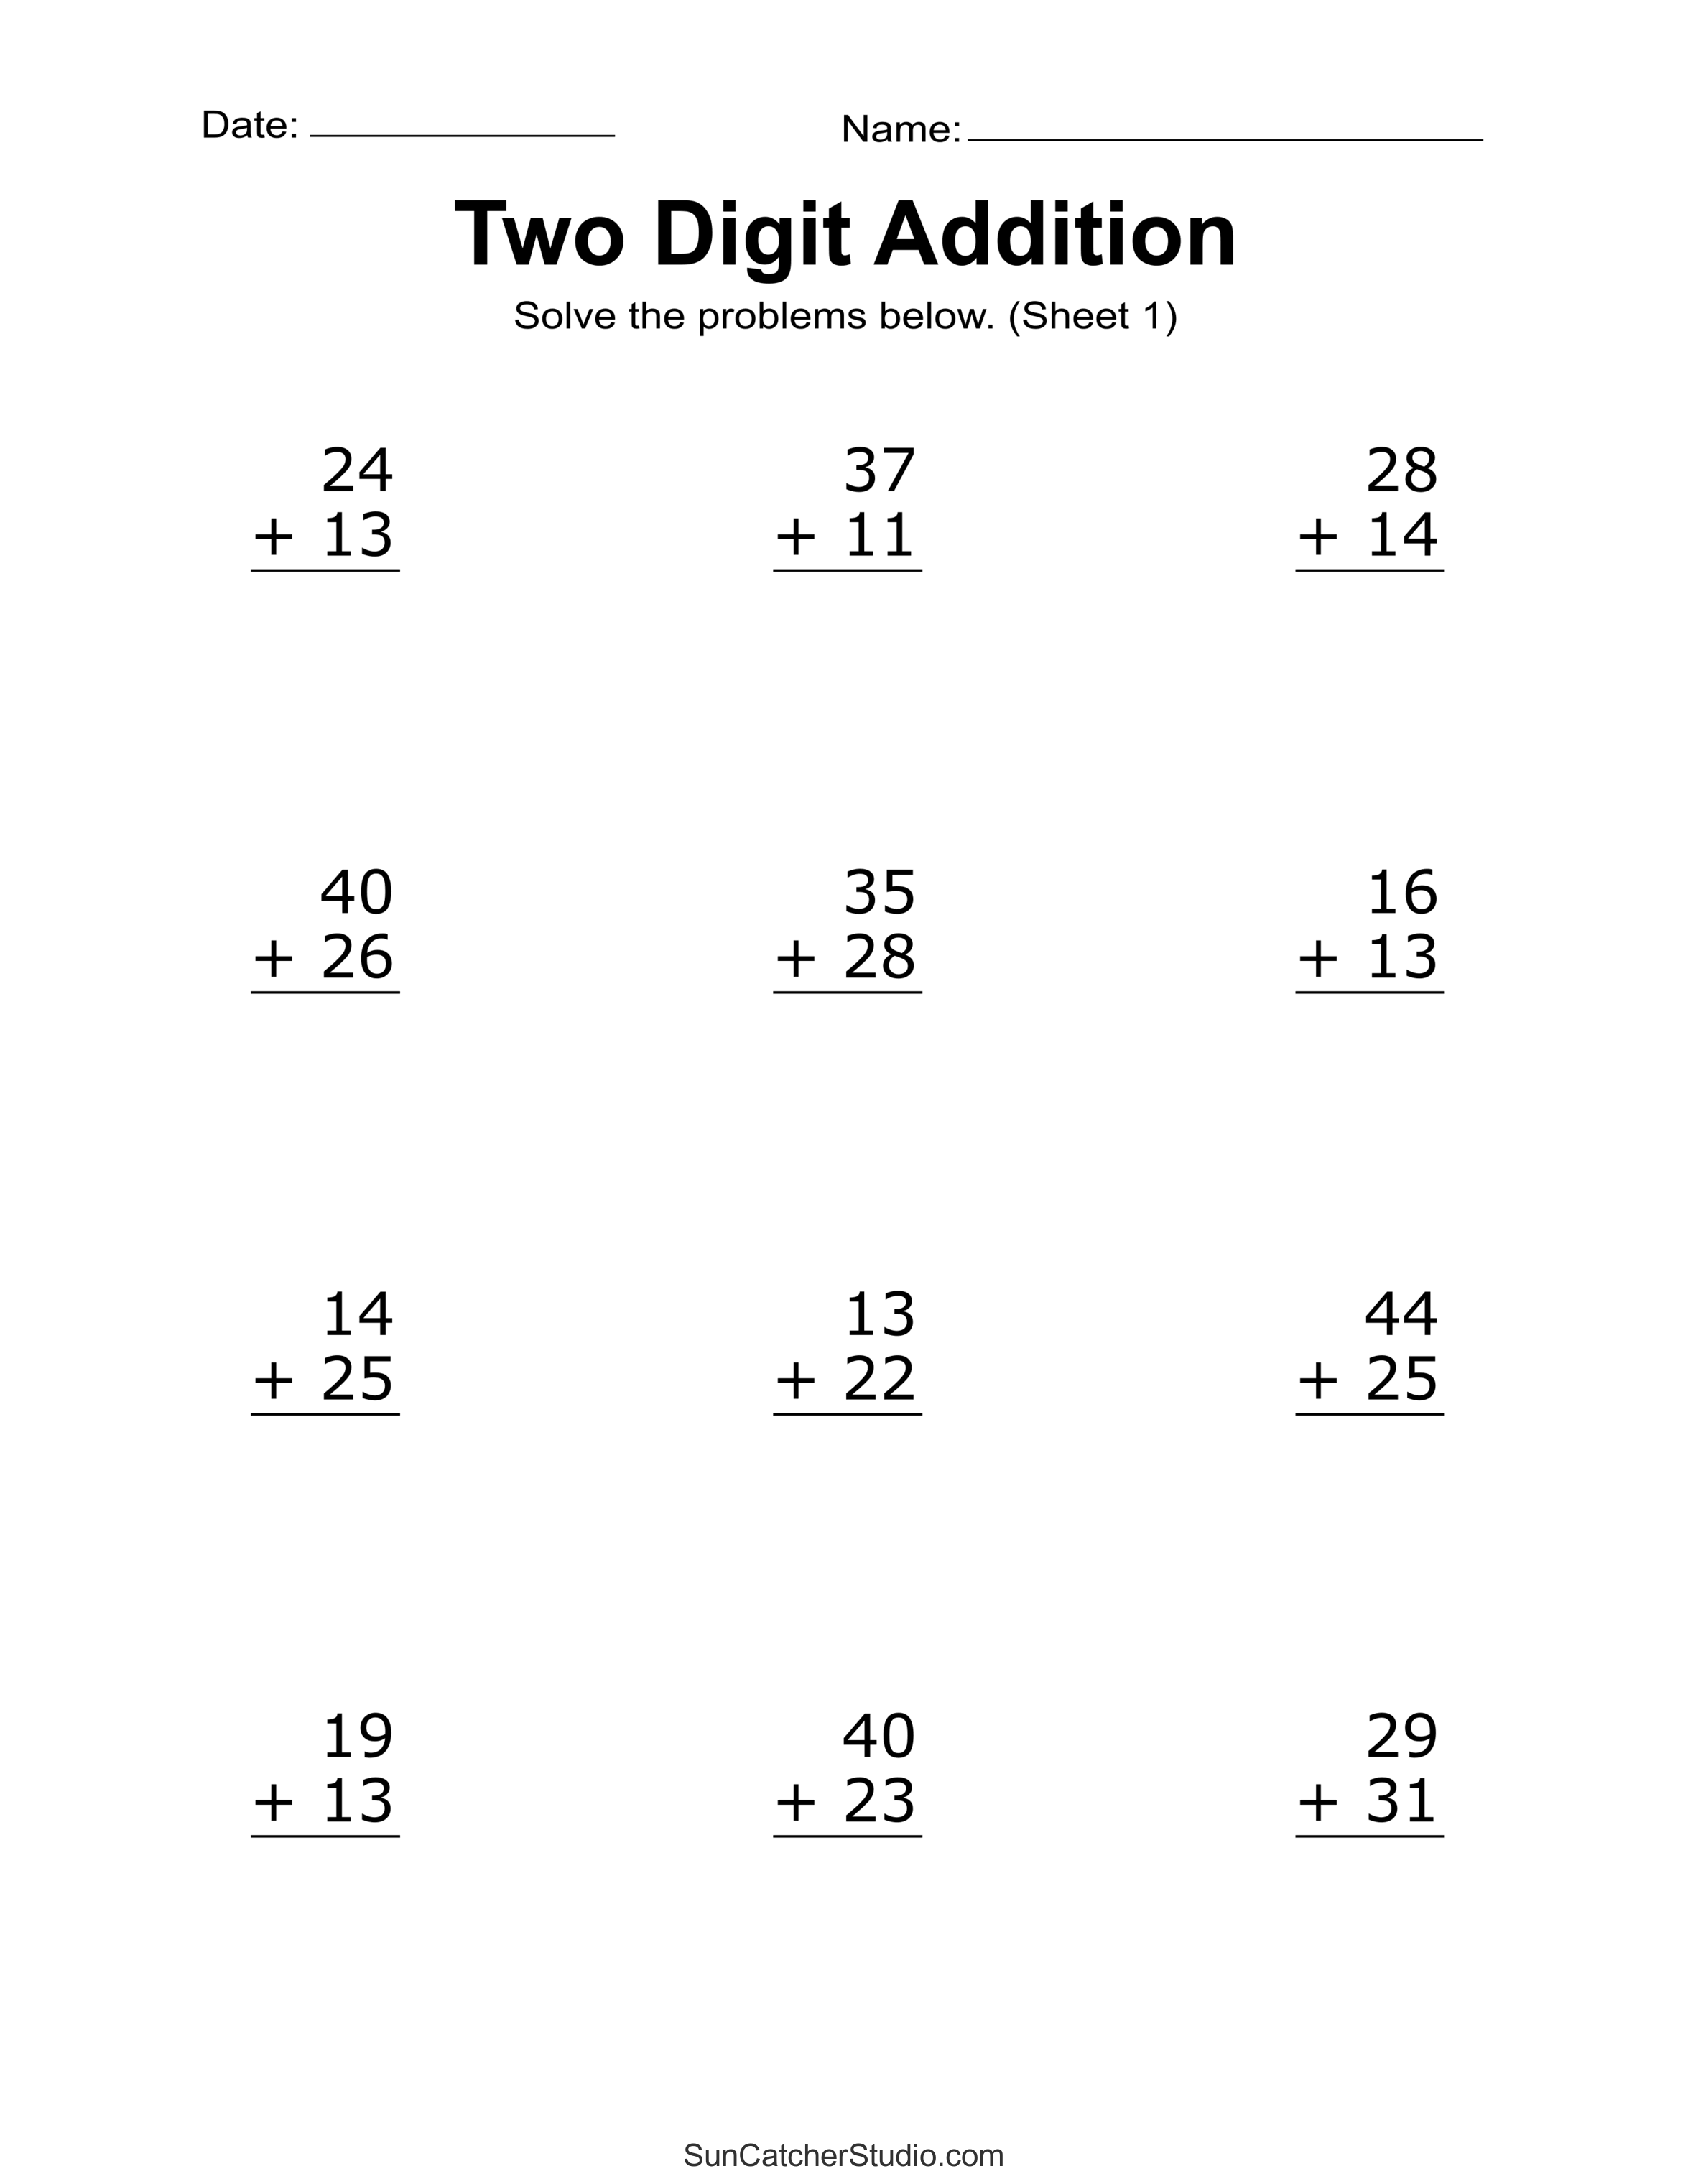 two-digit-addition-worksheets-printable-2-digit-problems-diy-projects-patterns-monograms